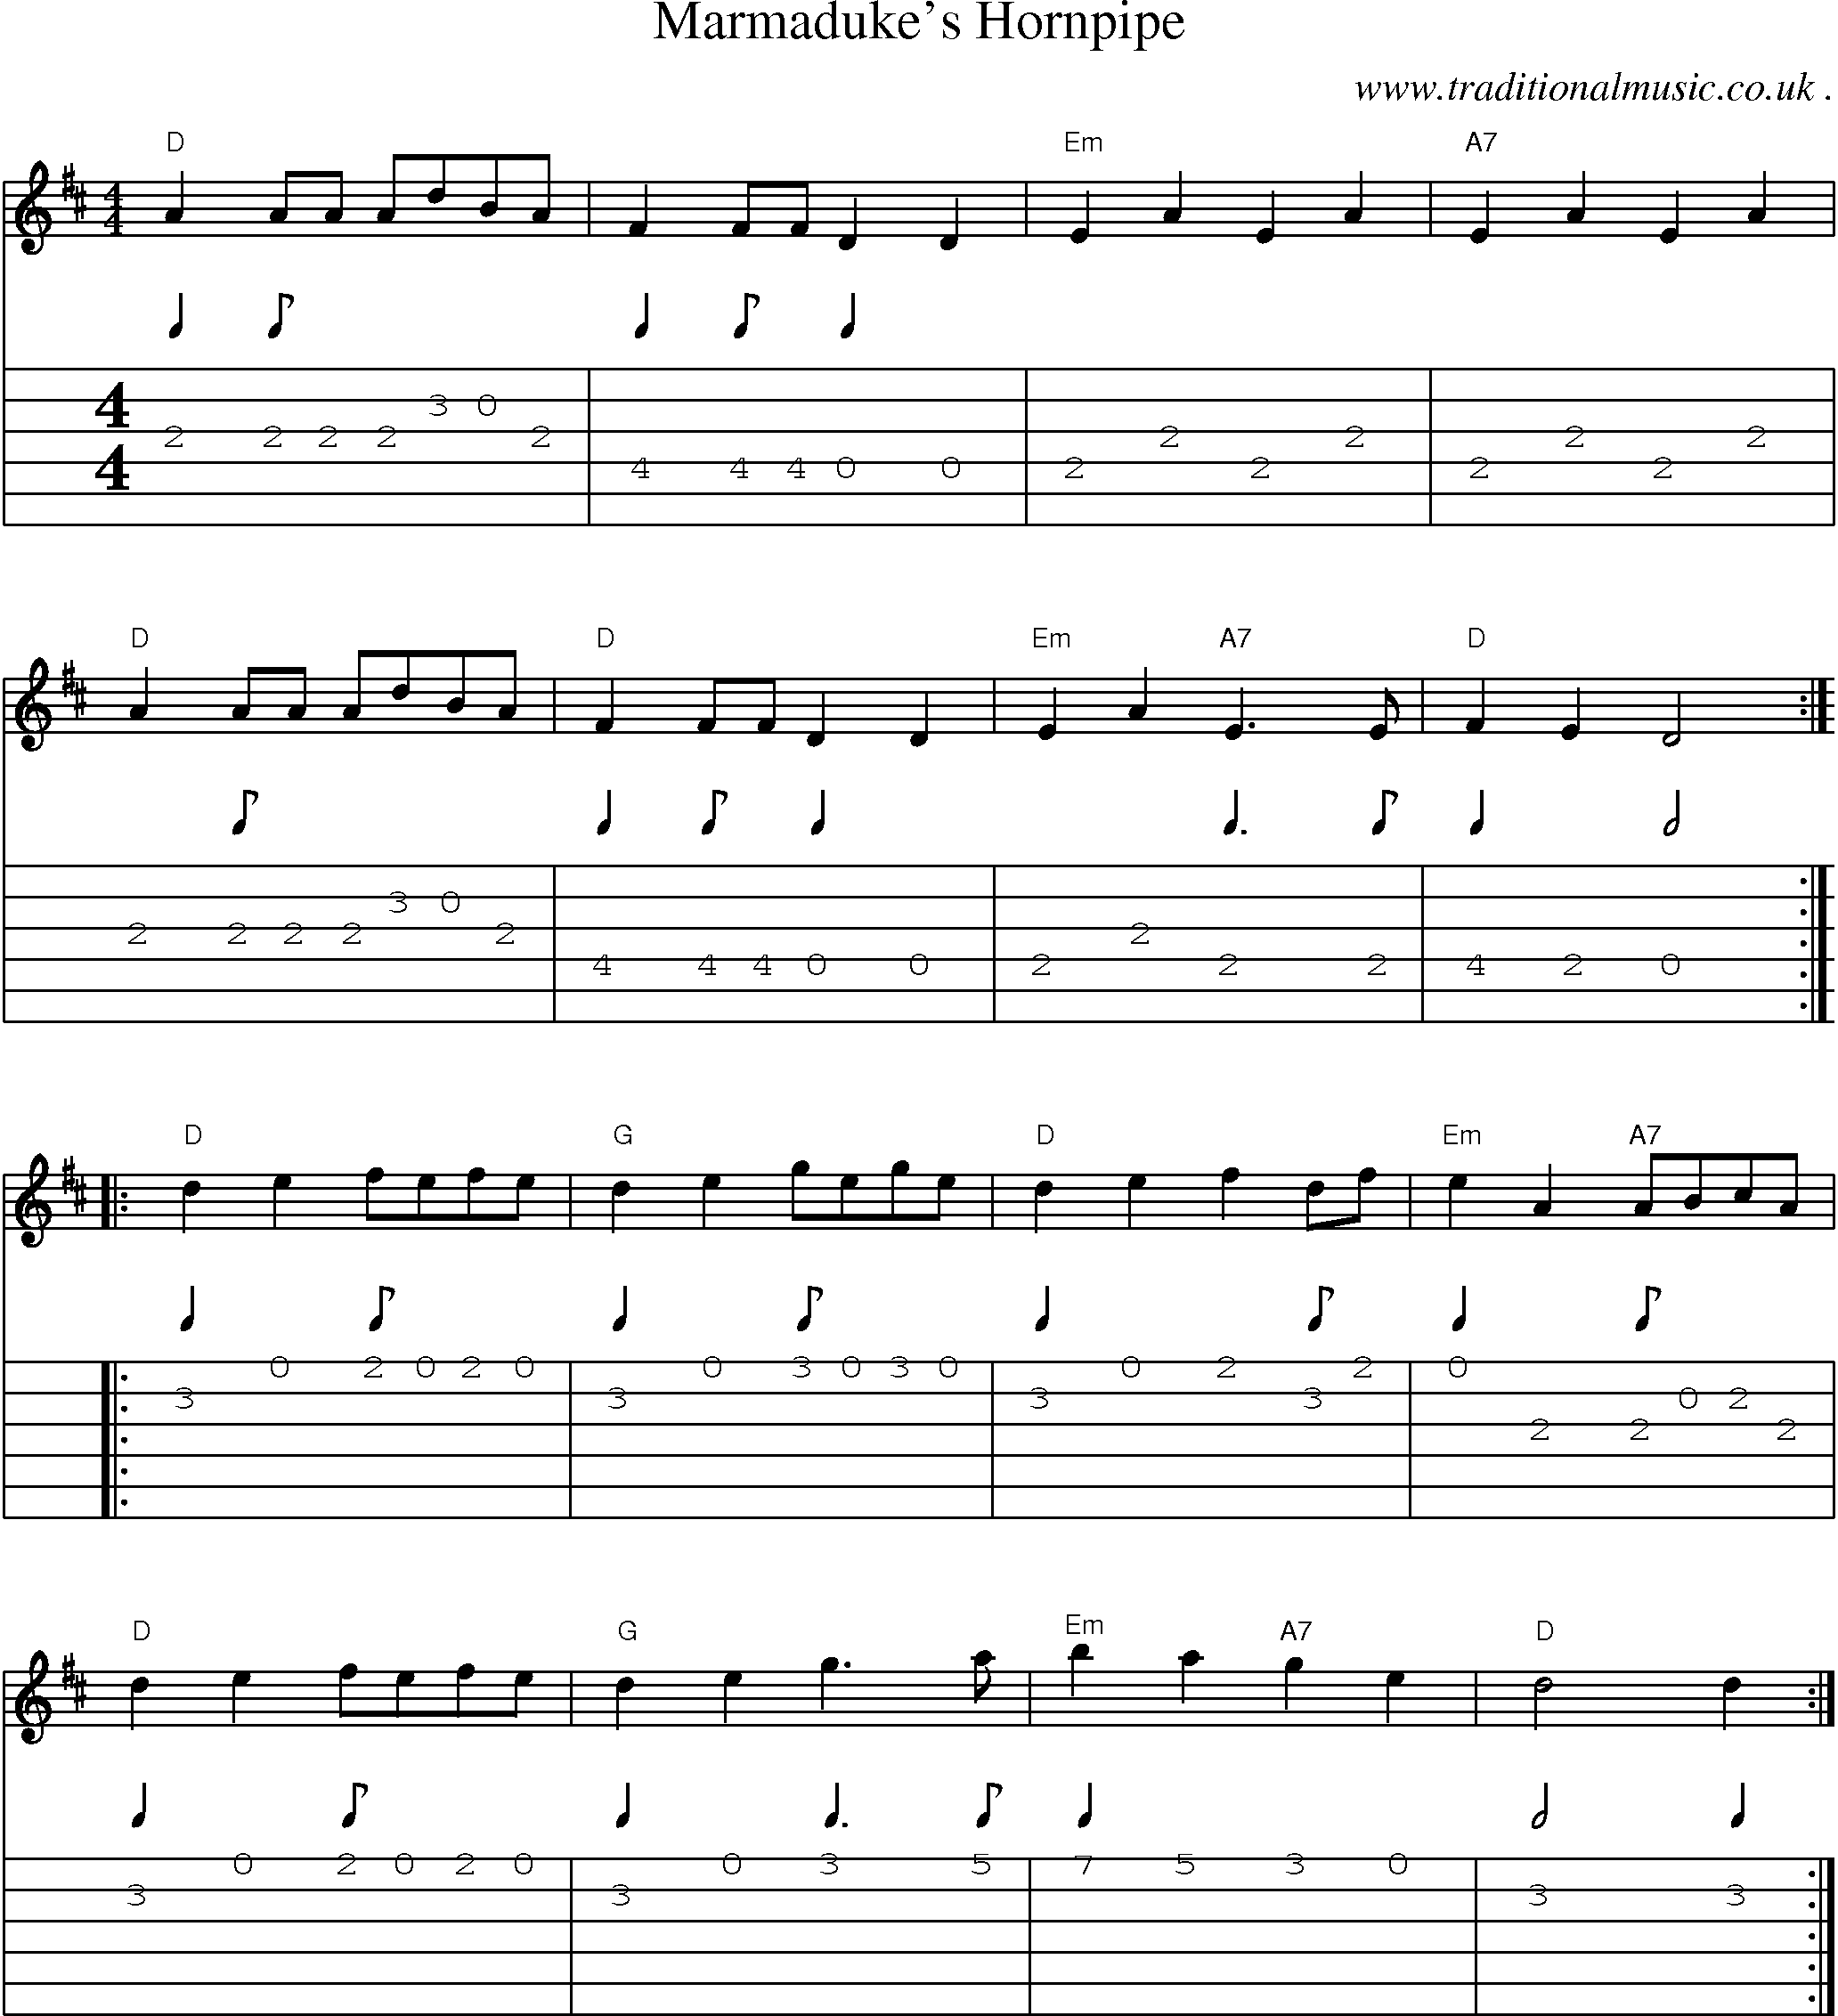 Sheet-Music and Guitar Tabs for Marmadukes Hornpipe